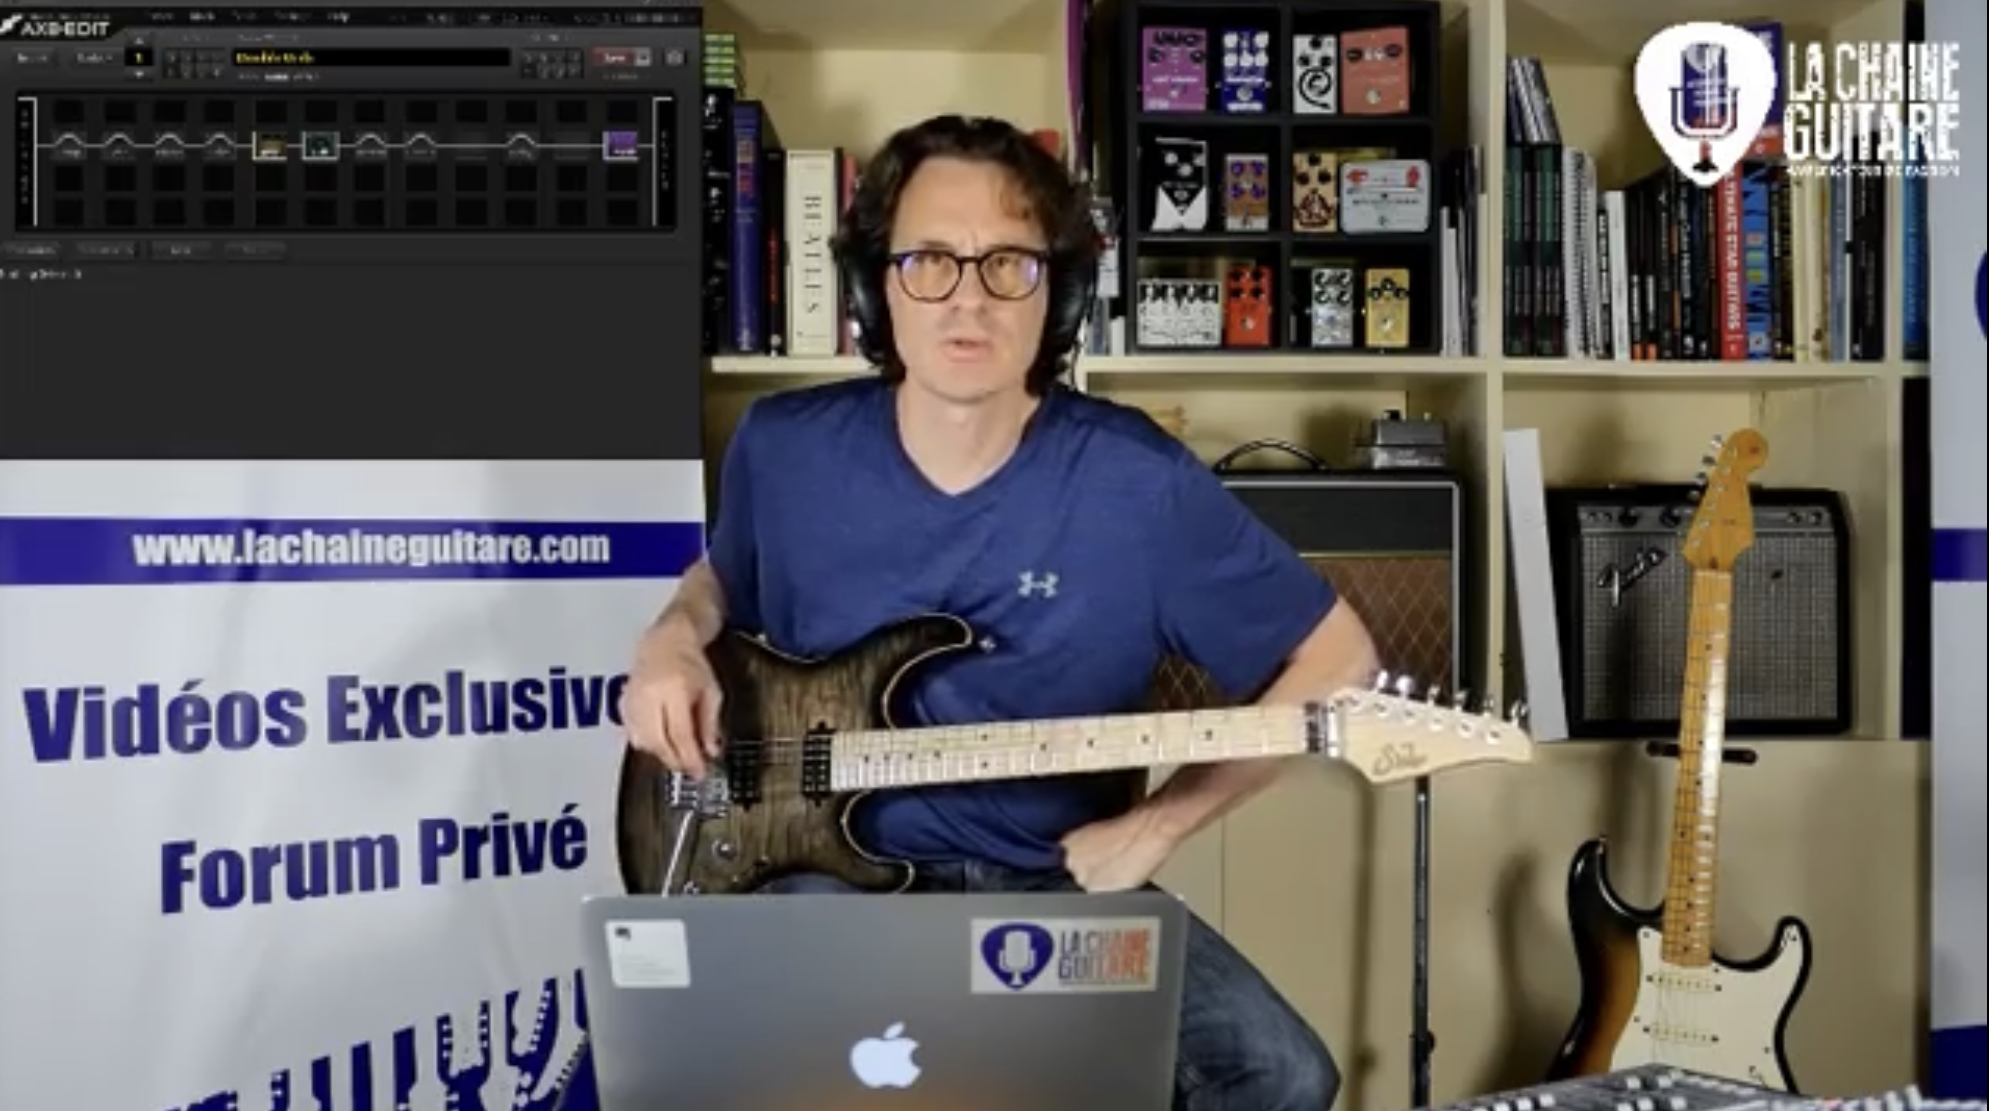 Test Fractal AX8 + Guitare Suhr M6 - Replay live Facebook / Twitch / YouTube